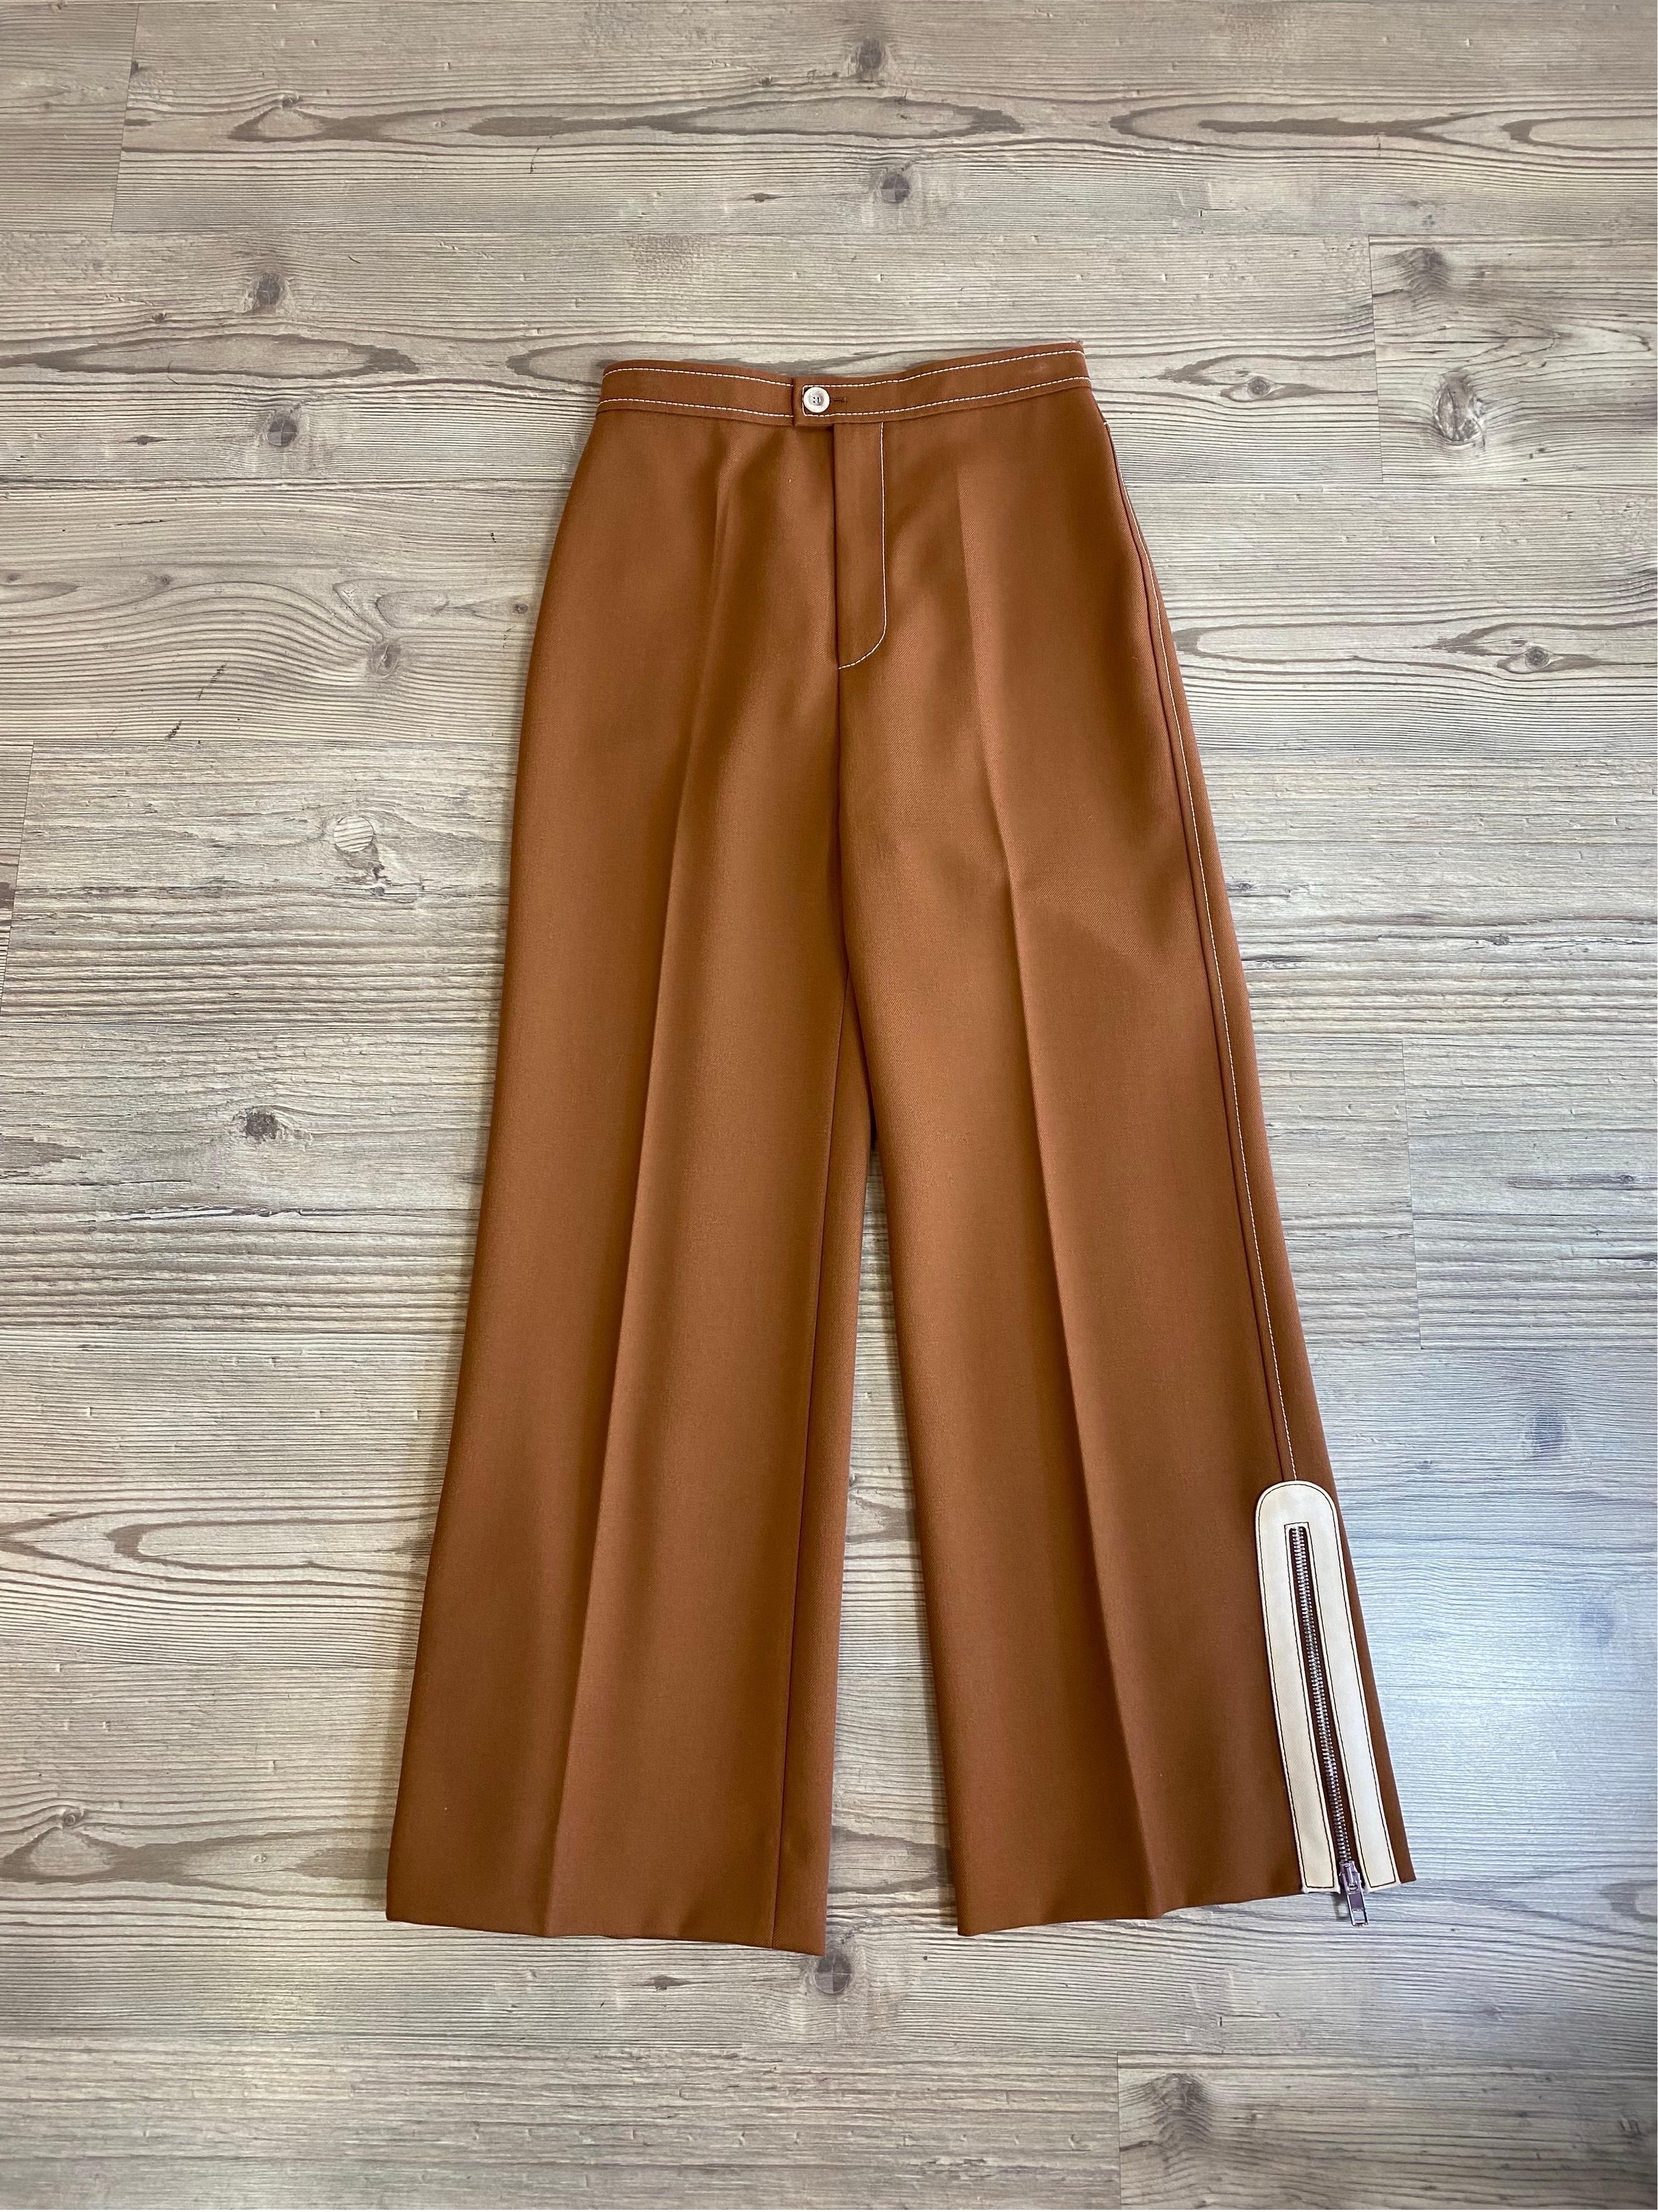 Gucci trousers.
2016 collection.
Made of wool. Lined in viscose and polyester.
Italian size 38.
Waist 35cm
Length 98 cm
Excellent general condition, with minimal signs of normal use.